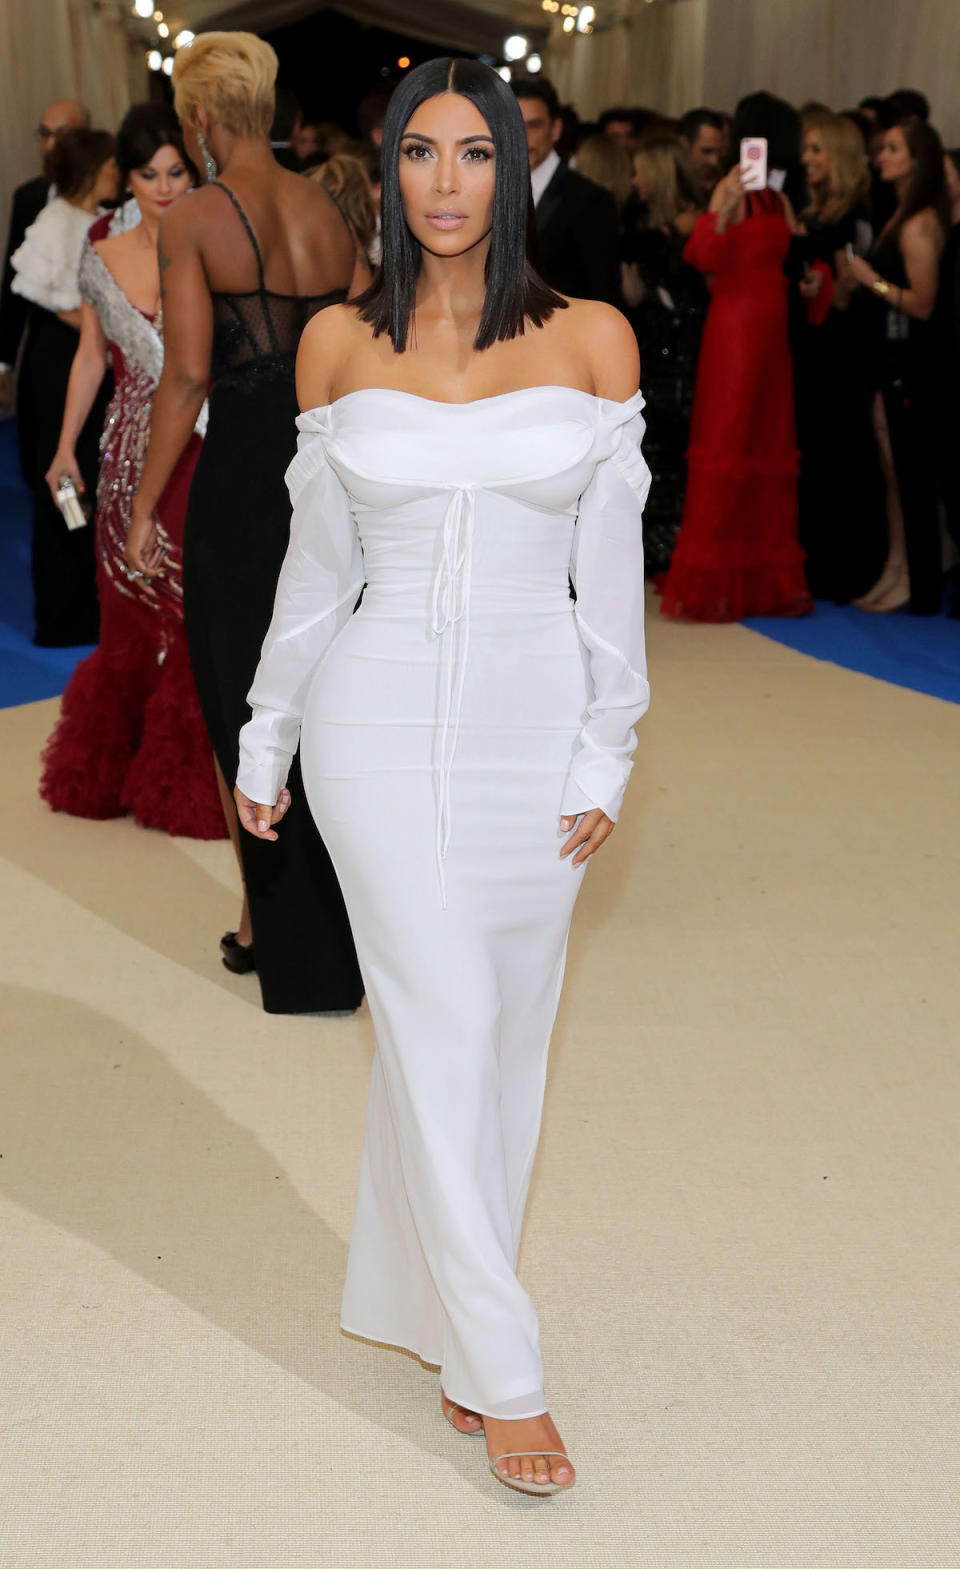 <p>Kim Kardashian West wore an off-the-shoulder white dress by designer Vivienne Westwood. The reality star noticeably wasn’t wearing any jewelry. (Photo by Neilson Barnard/Getty Images) </p>